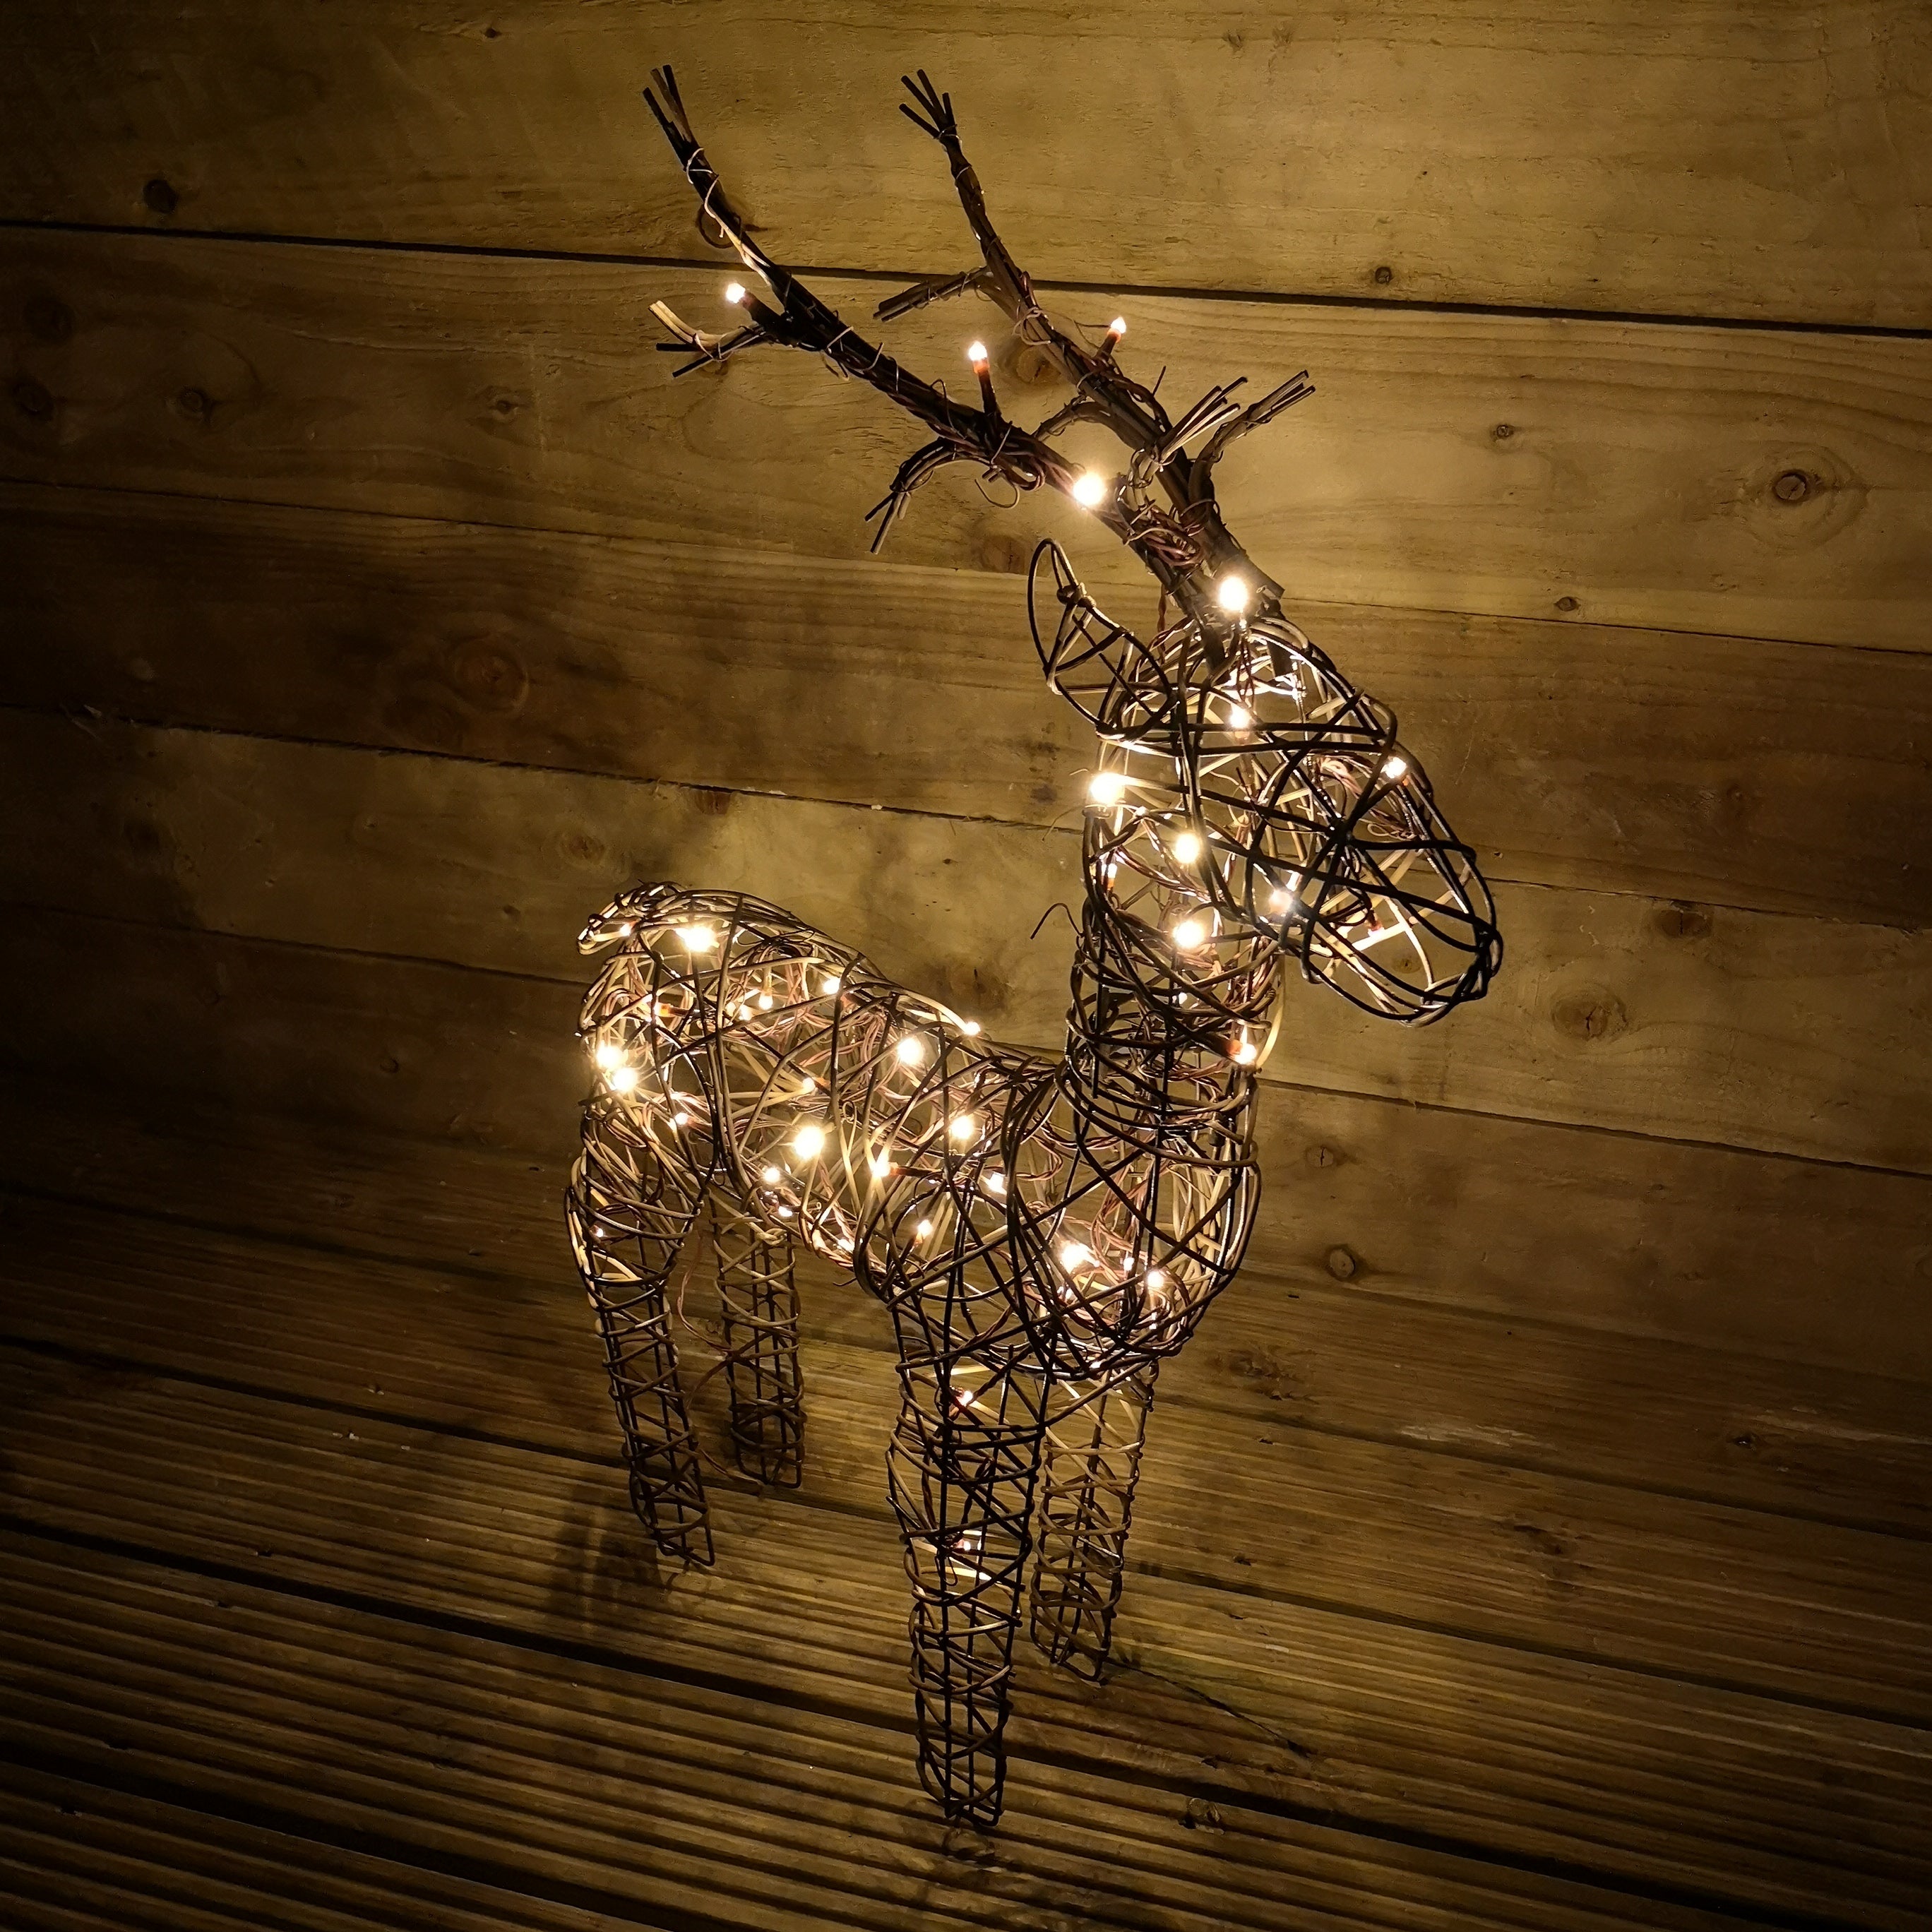 60cm Brown Outdoor Standing LED Wicker Reindeer Christmas Decoration Warm White